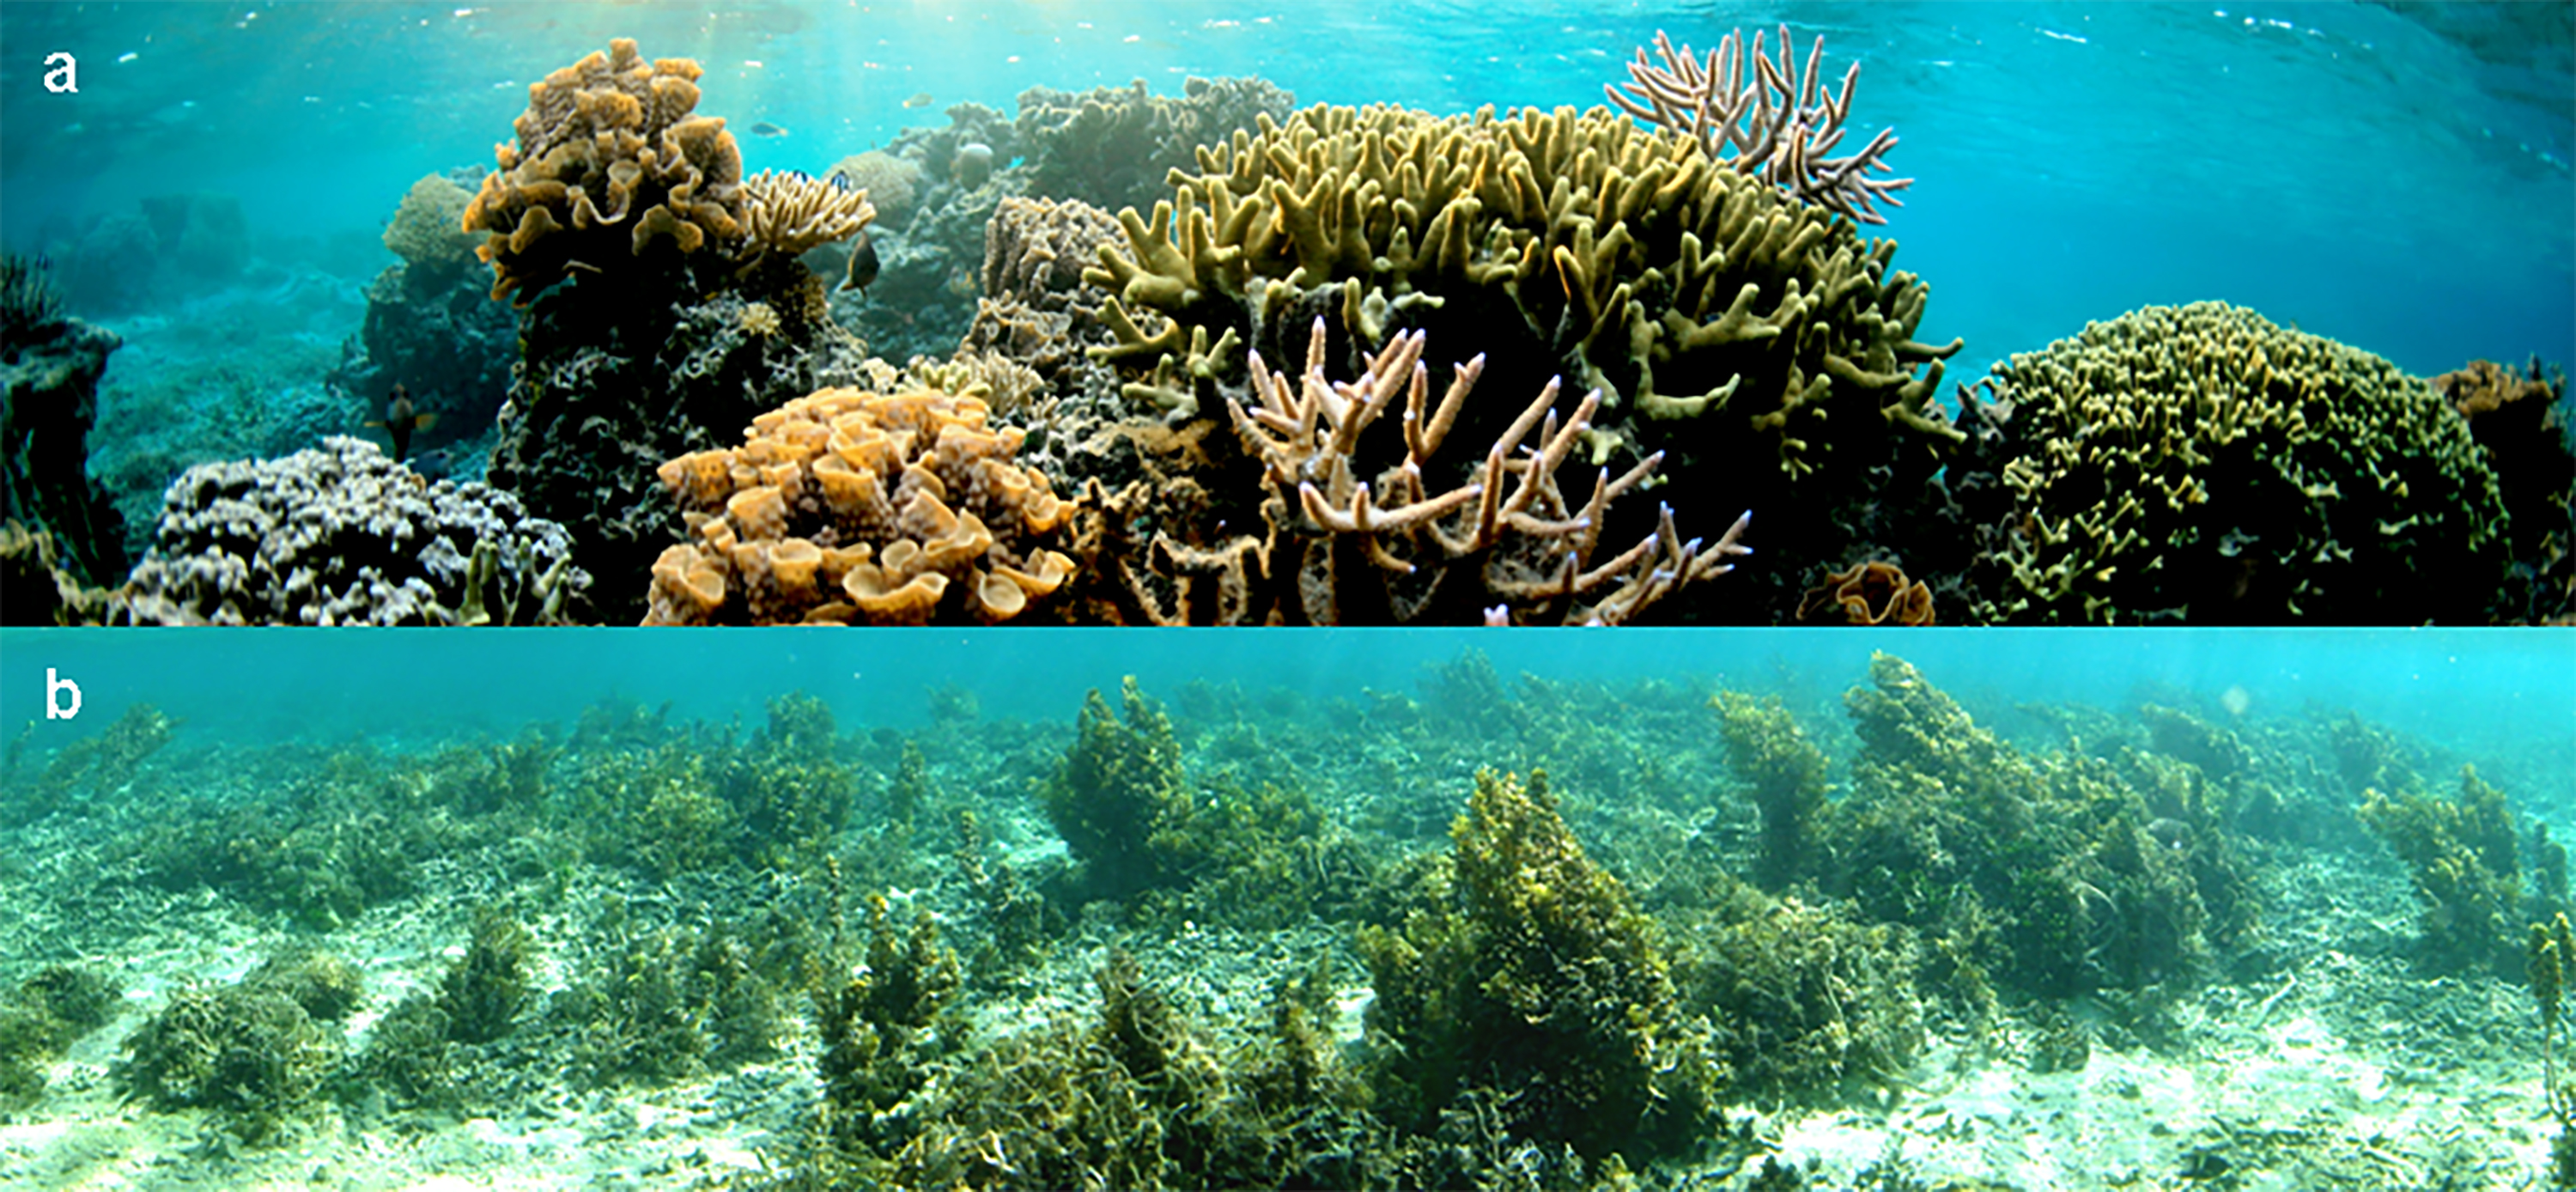 At top, a Pacific reef off of Fiji where fishing is banned. Corals are vibrant, and reefs grow high and robust. At bottom, a reef next to the first one, but where fishing is allowed and waters and heavily fished. With few fish left to eat the seaweed, the plant overgrowns the reefs and shades them out. Credit: Georgia Tech / Hay lab